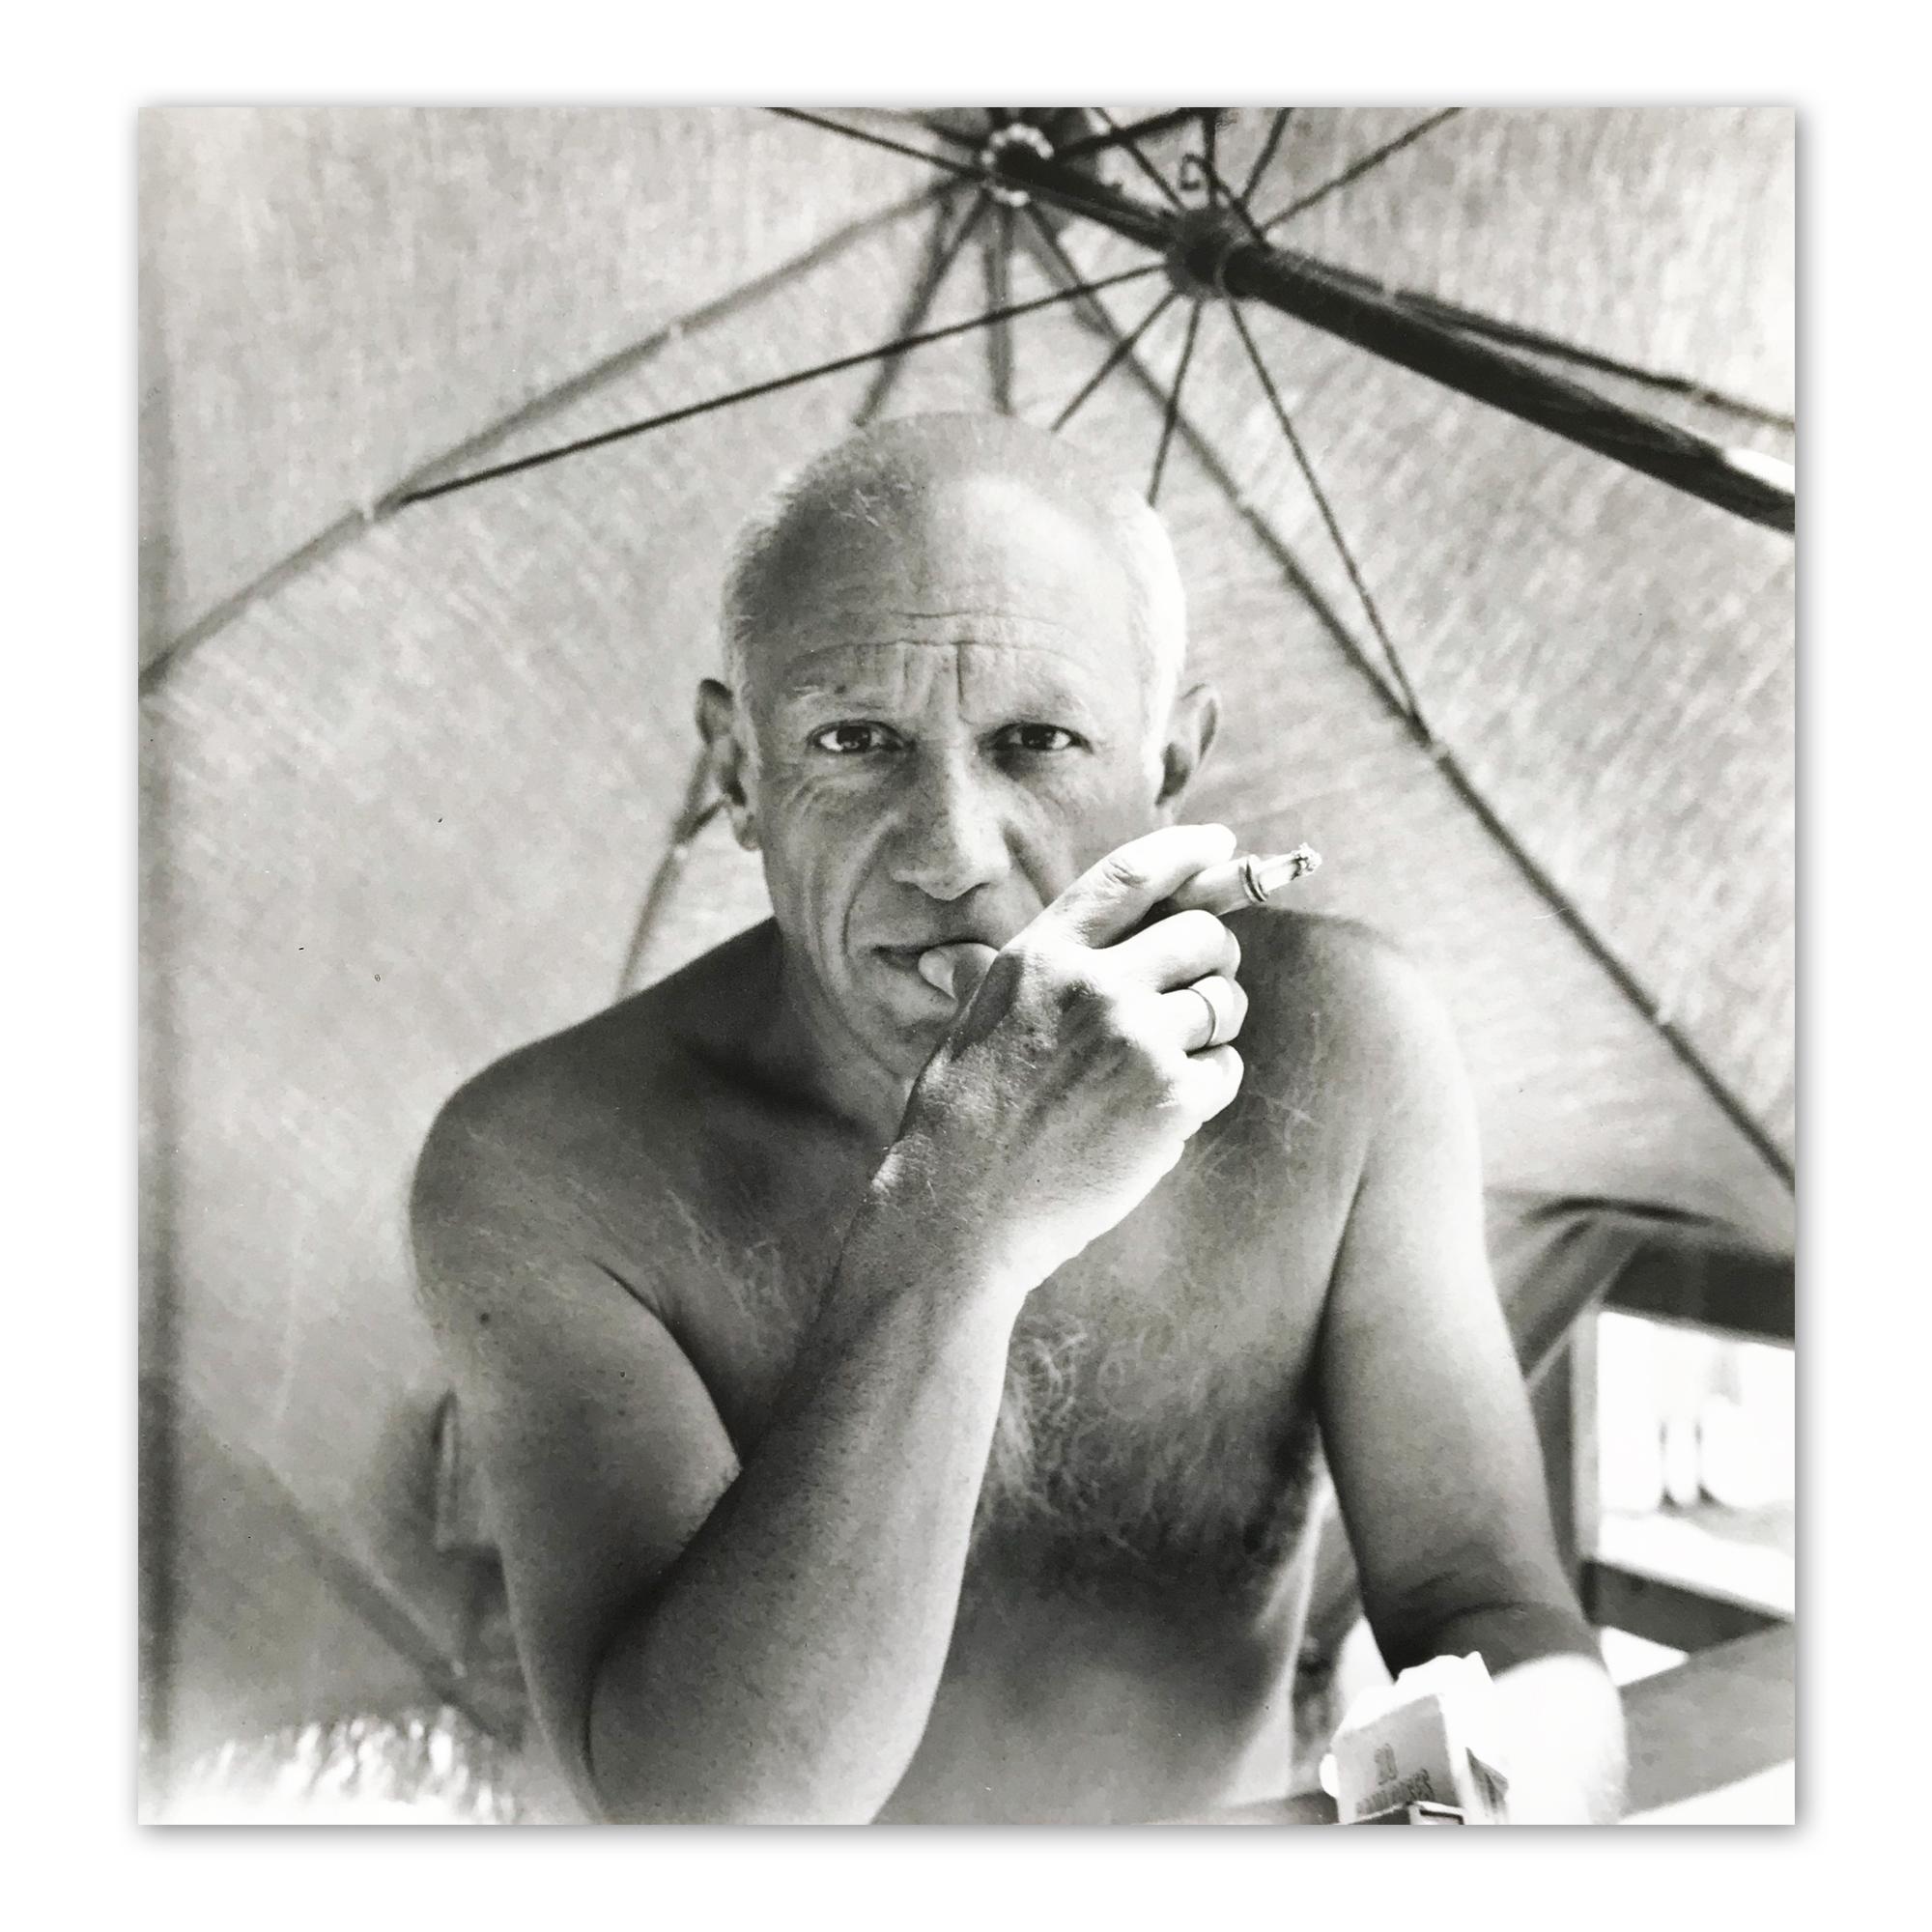 Willy Maywald Portrait Photograph - Portrait of Picasso, Silver Gelatine Print, Black and White Photography